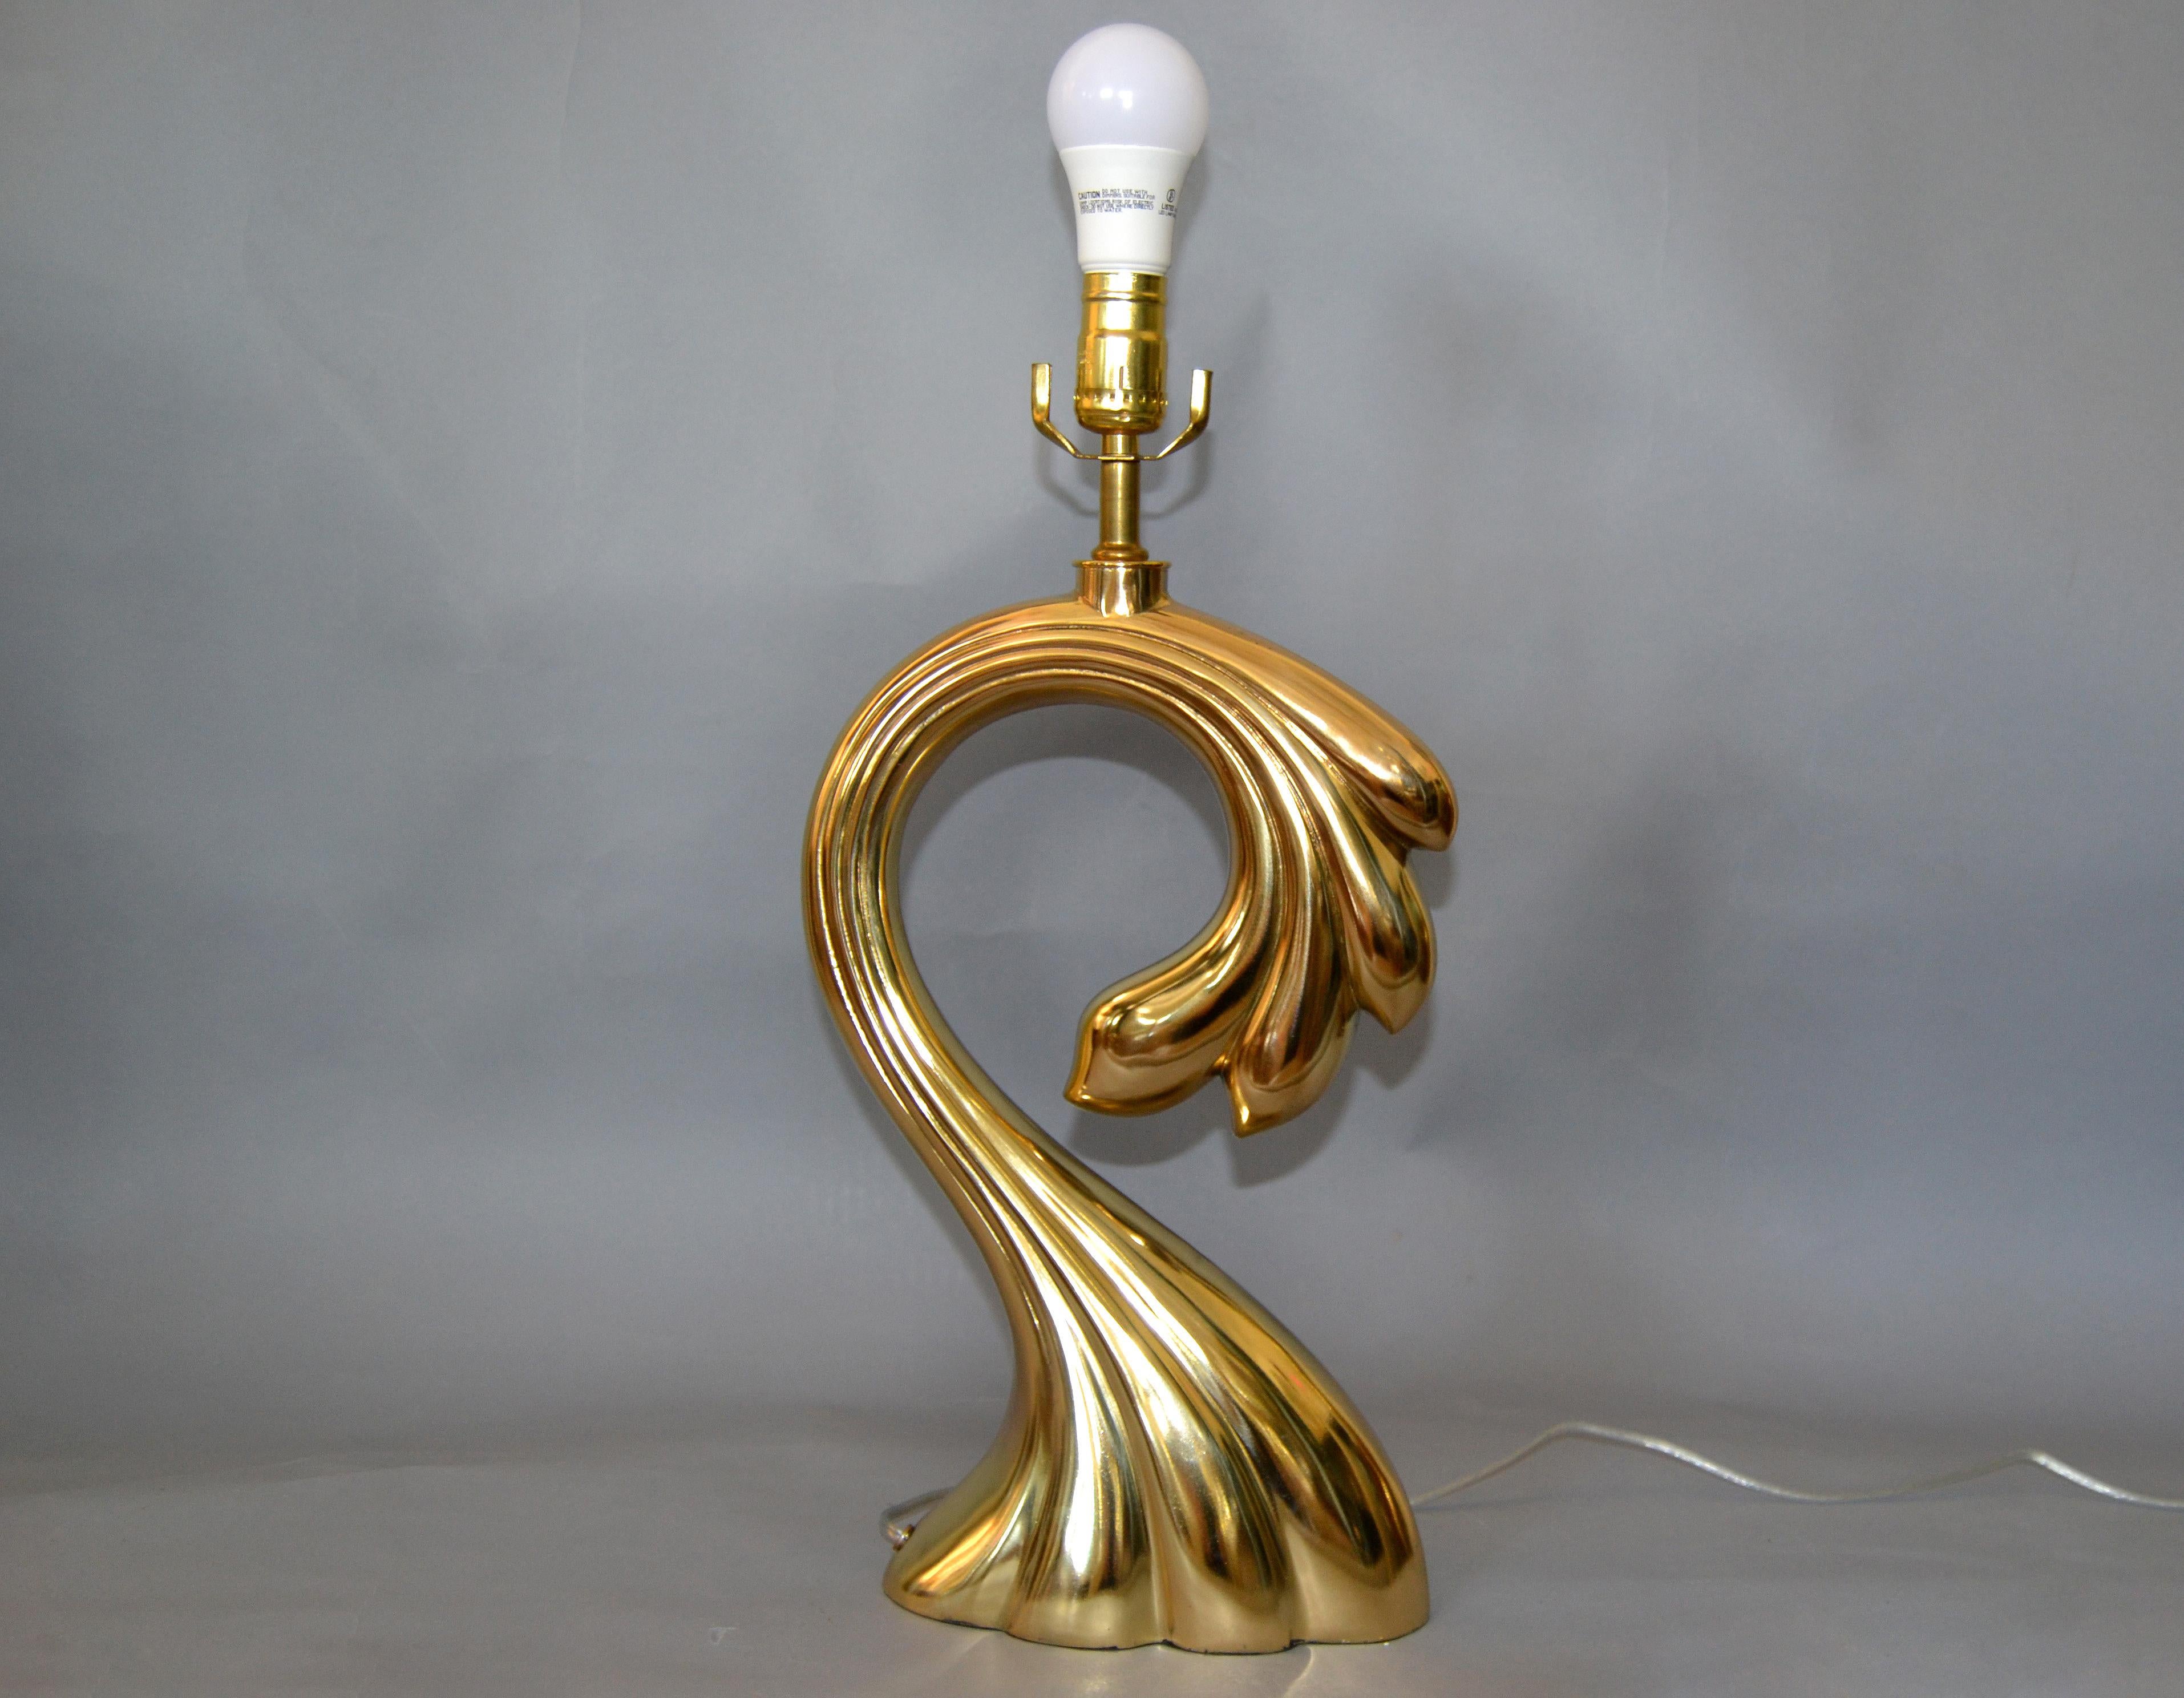 We offer a Mid-Century Modern sculptural brass table lamp from the 1970s in the manner of Pierre Cardin.
Newly rewired and uses a max. 75 watts light bulb.
Note: We have no shade, harp or finial with it.
The base is covered with felt to protect